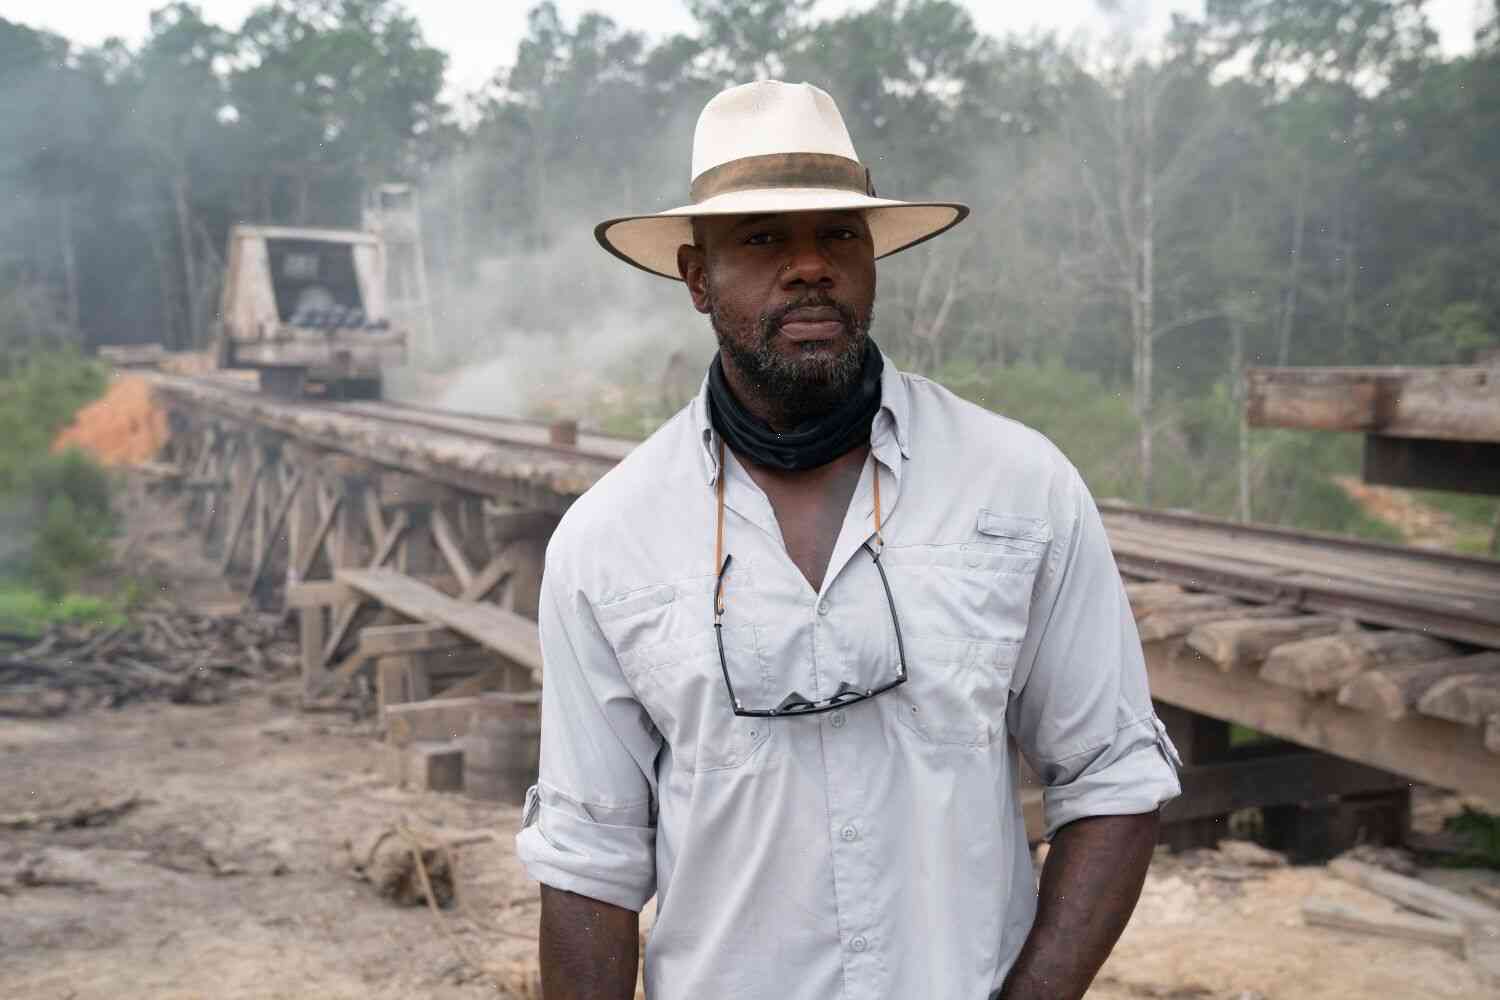 "Emancipation" director Antoine Fuqua says he's worried about the Academy's reaction to the Golden Lion